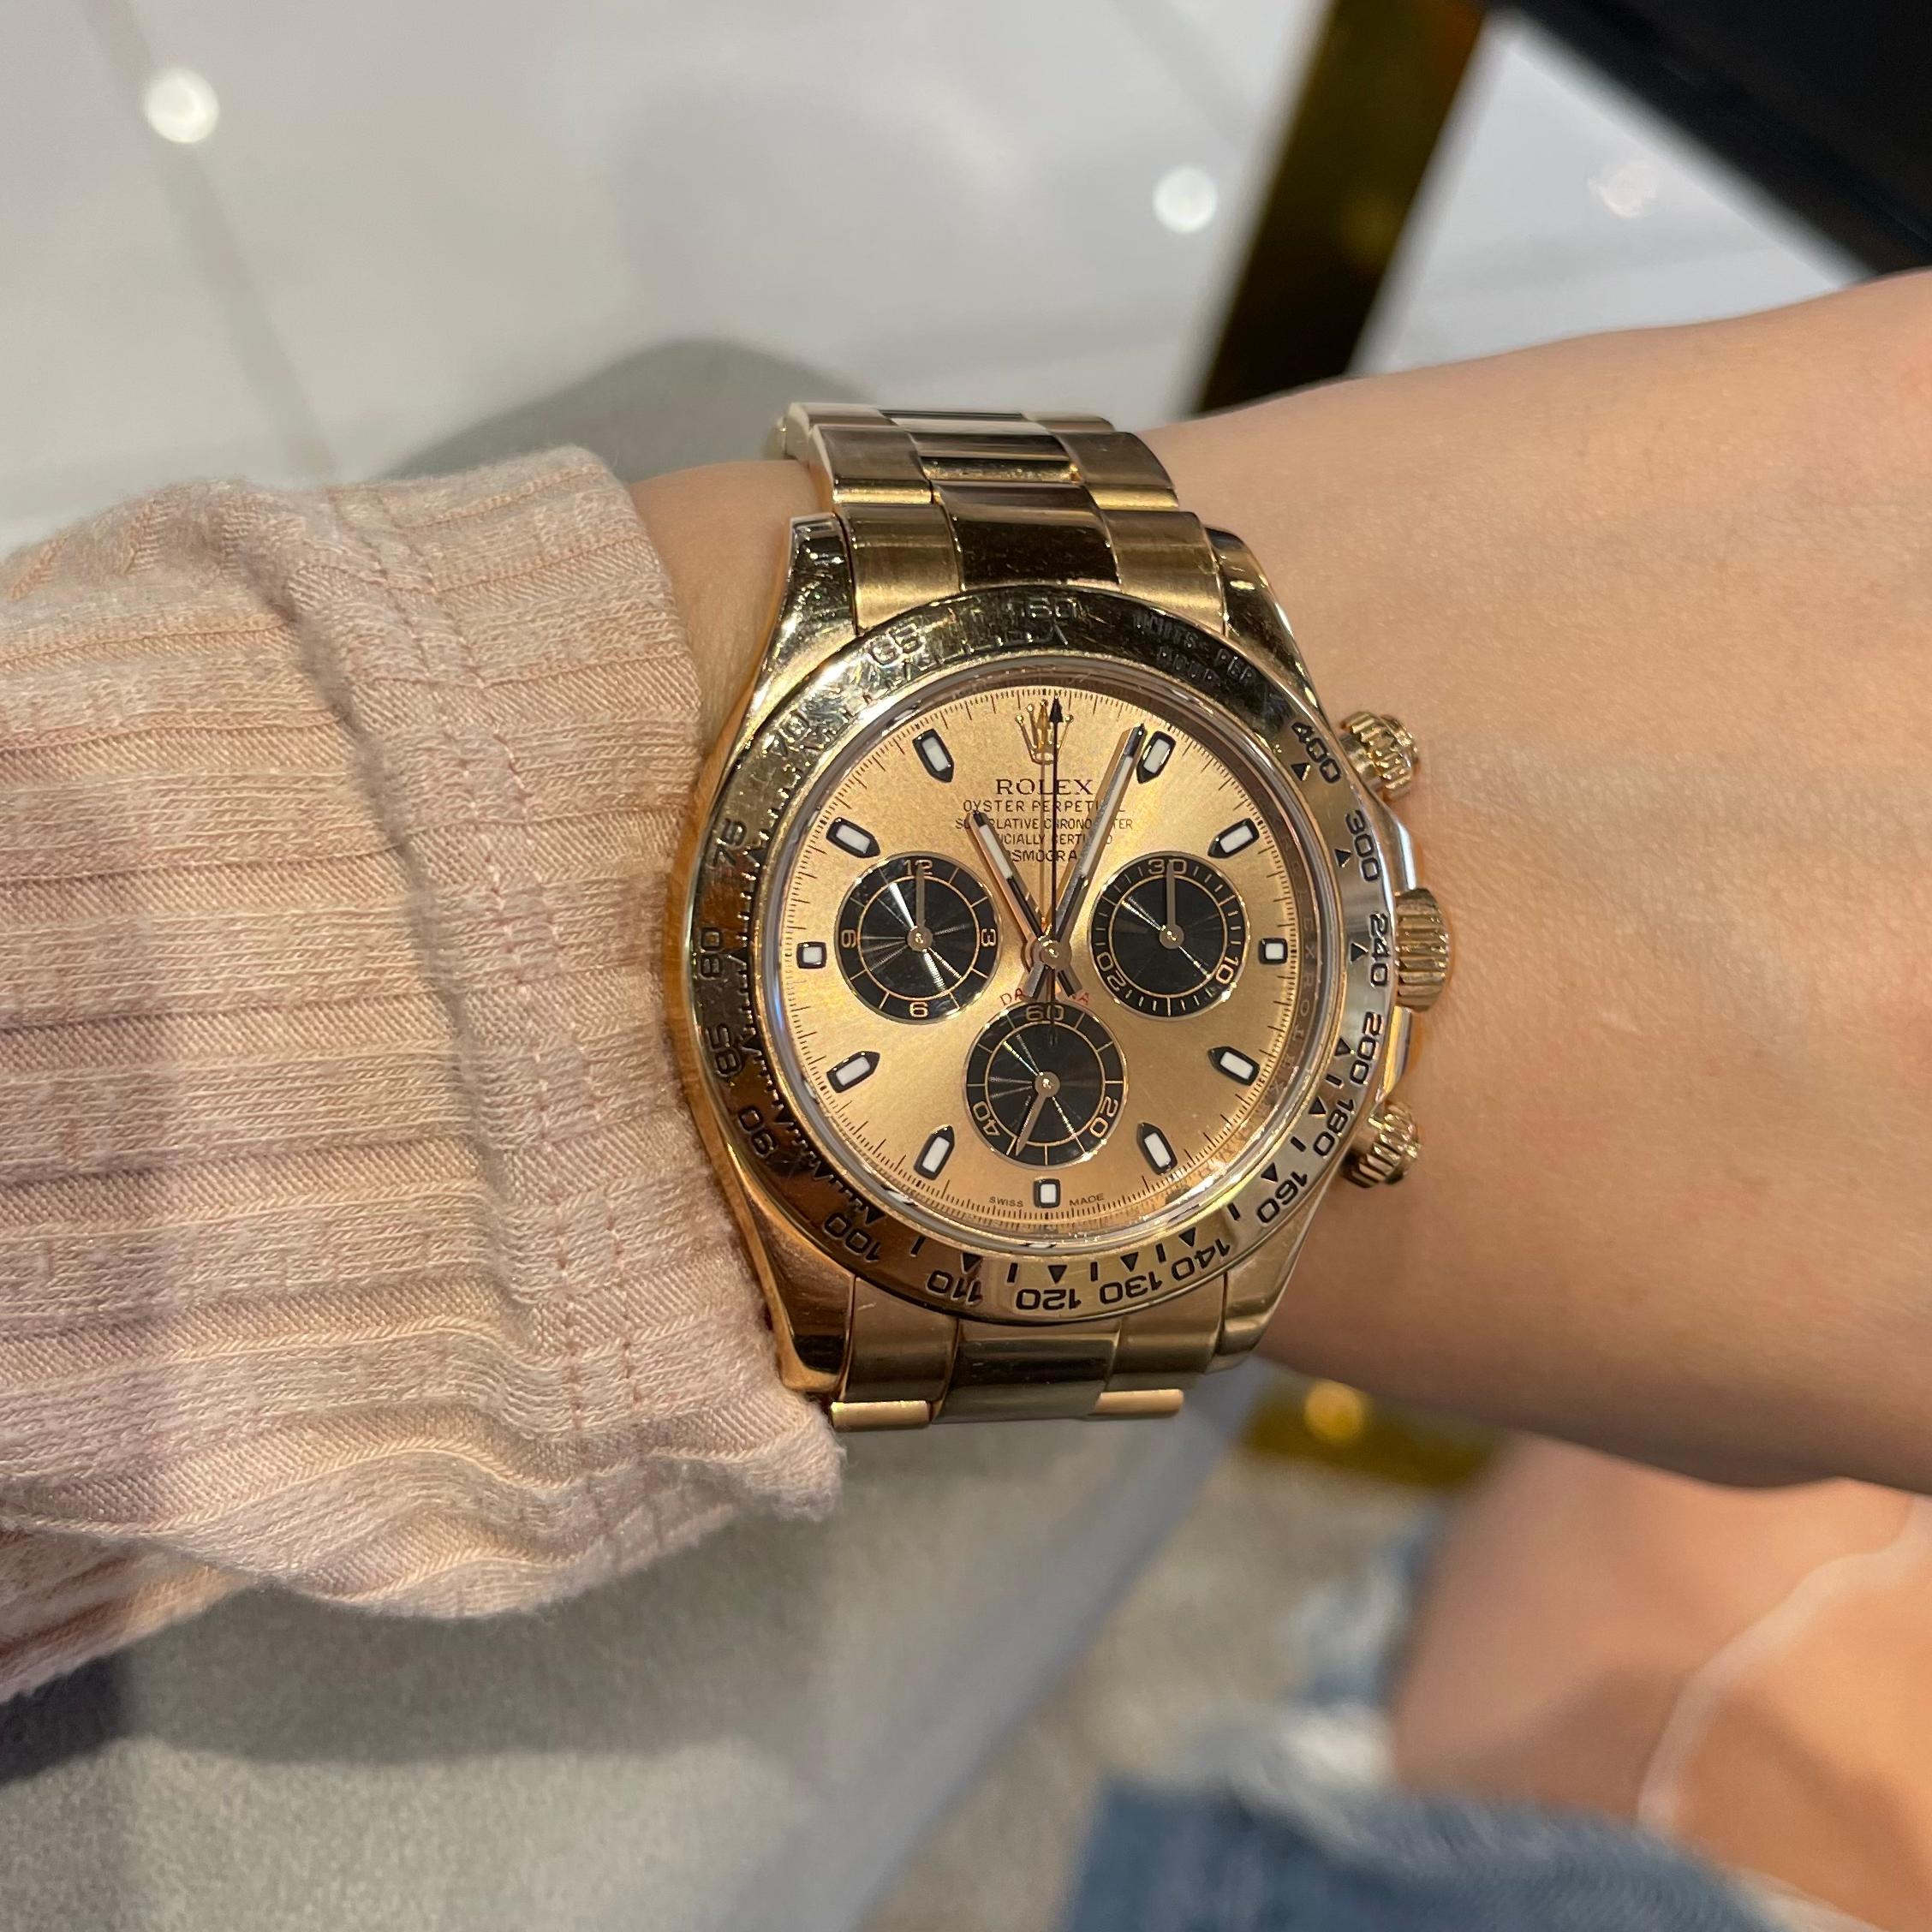 Brand: Rolex

Model Name: Daytona Cosmograph 

Model Number: 116505

Movement: Mechanical Automatic

Case Size: 40 mm

Case Material: Rose Gold

Dial: Pink

Bracelet:  Rose Gold 

Crystal: Sapphire Crystal 

Year:  G serial (2010)

Water Resistance: